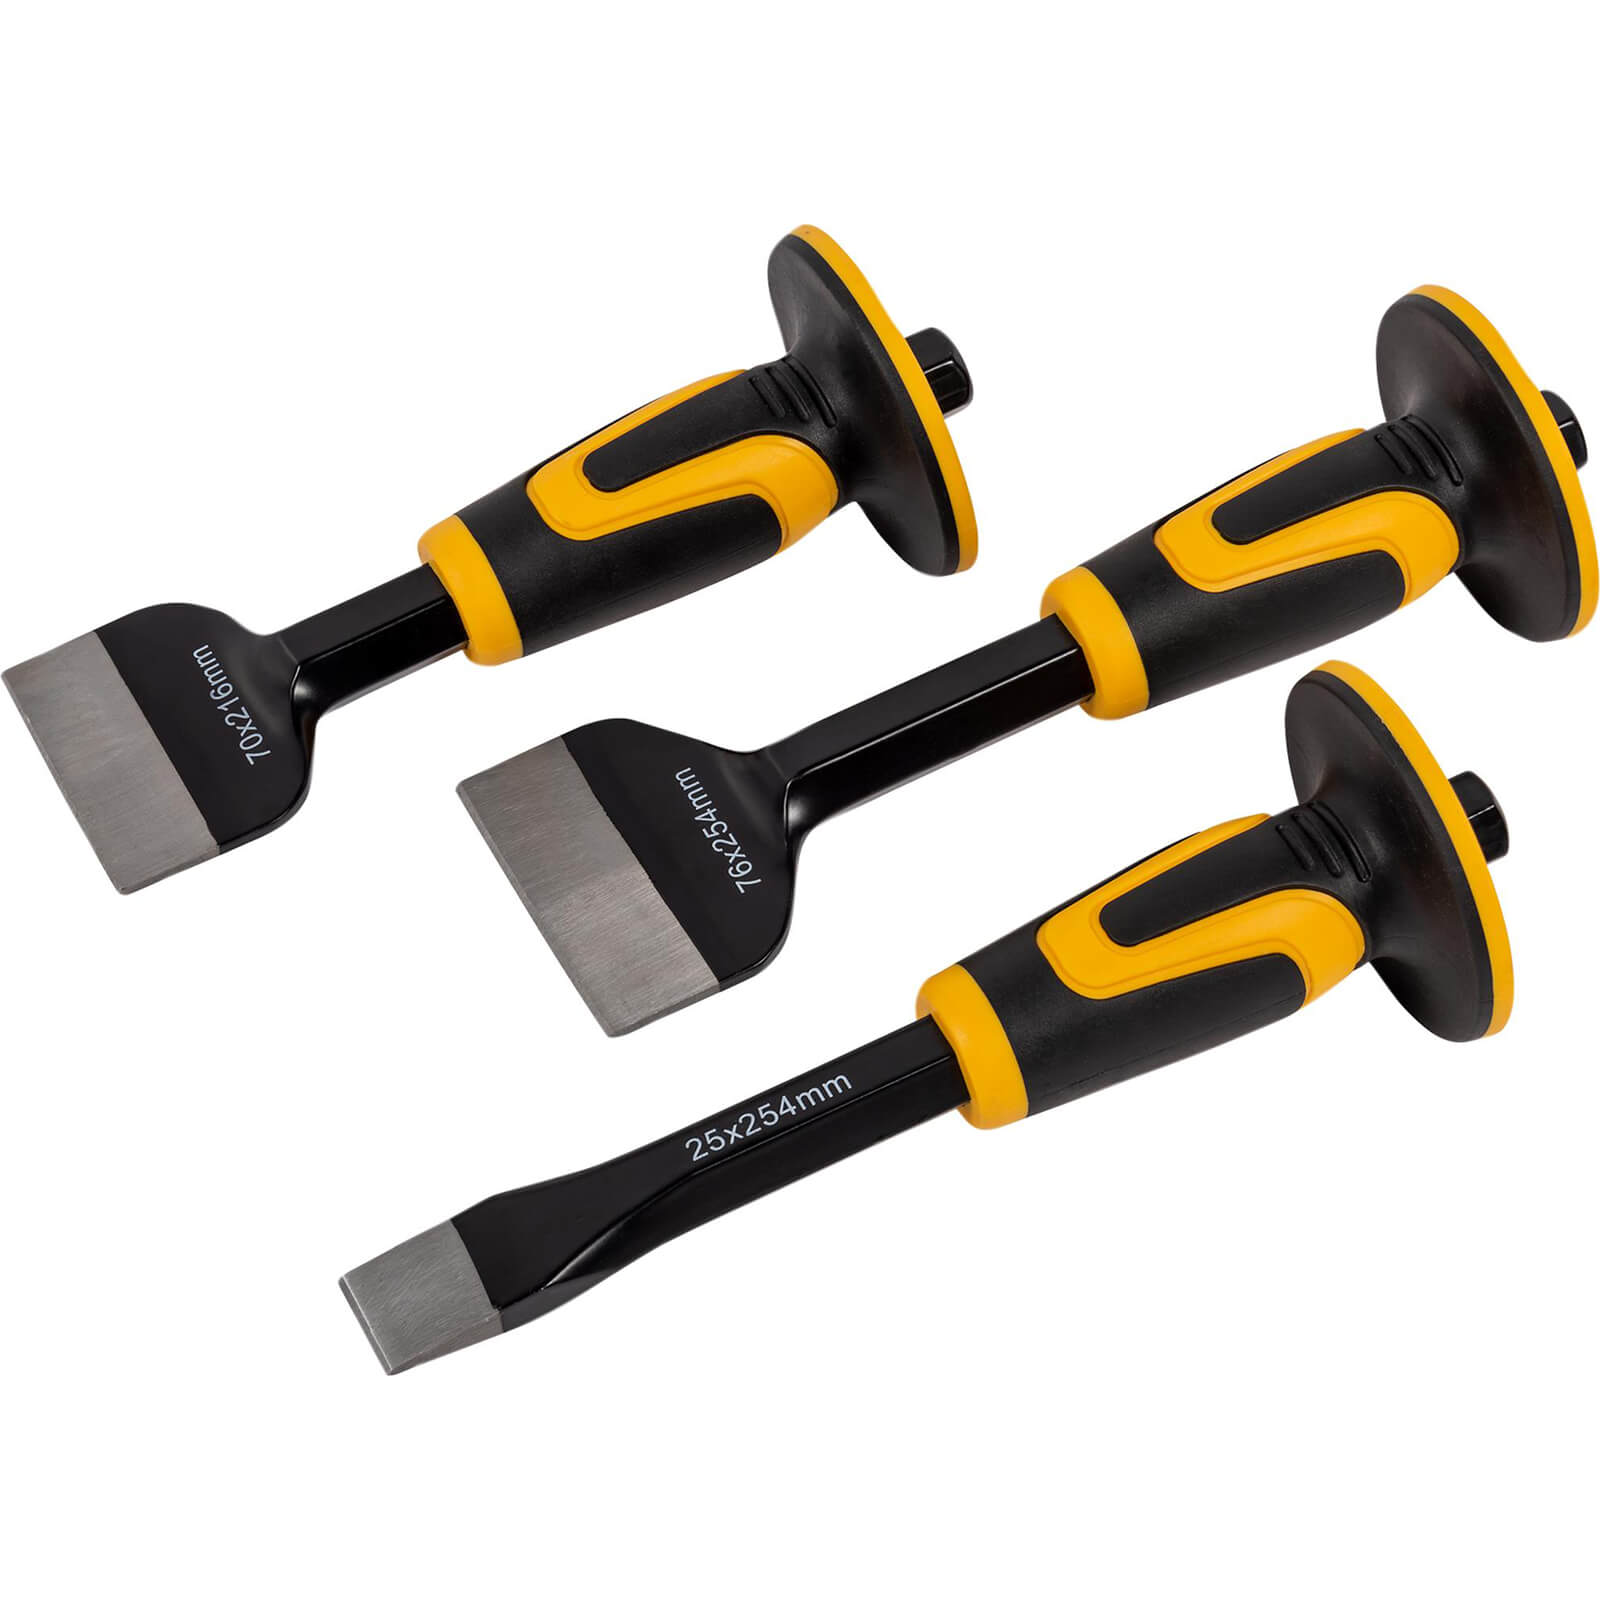 Photo of Roughneck 3 Piece Chisel & Bolster Set